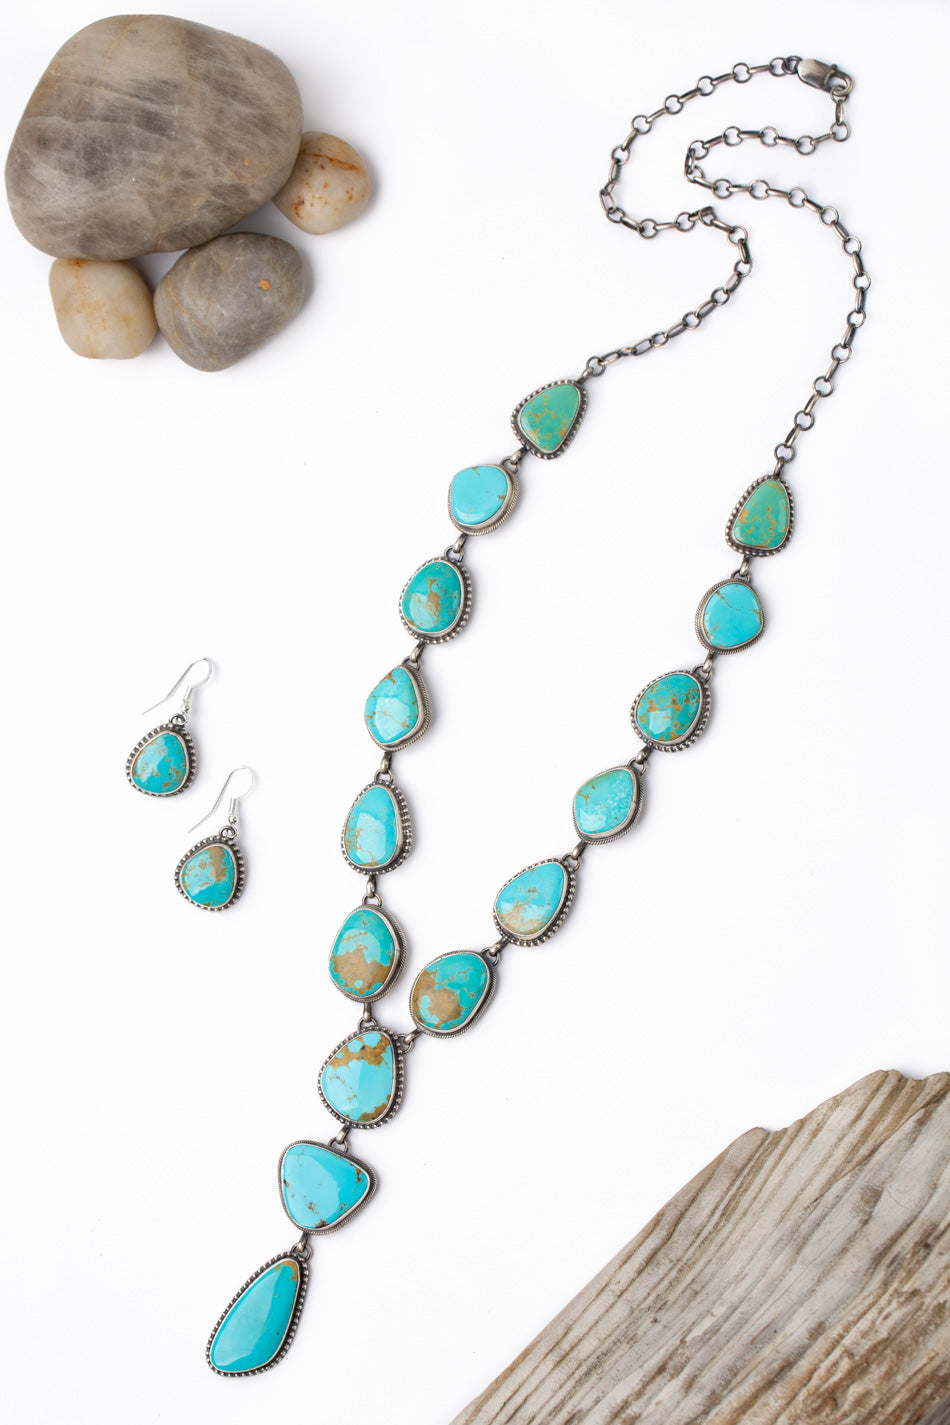 Lutricia Yellowhair Native American 28.5" Sonoran Turquoise Statement Necklace And Earring Set